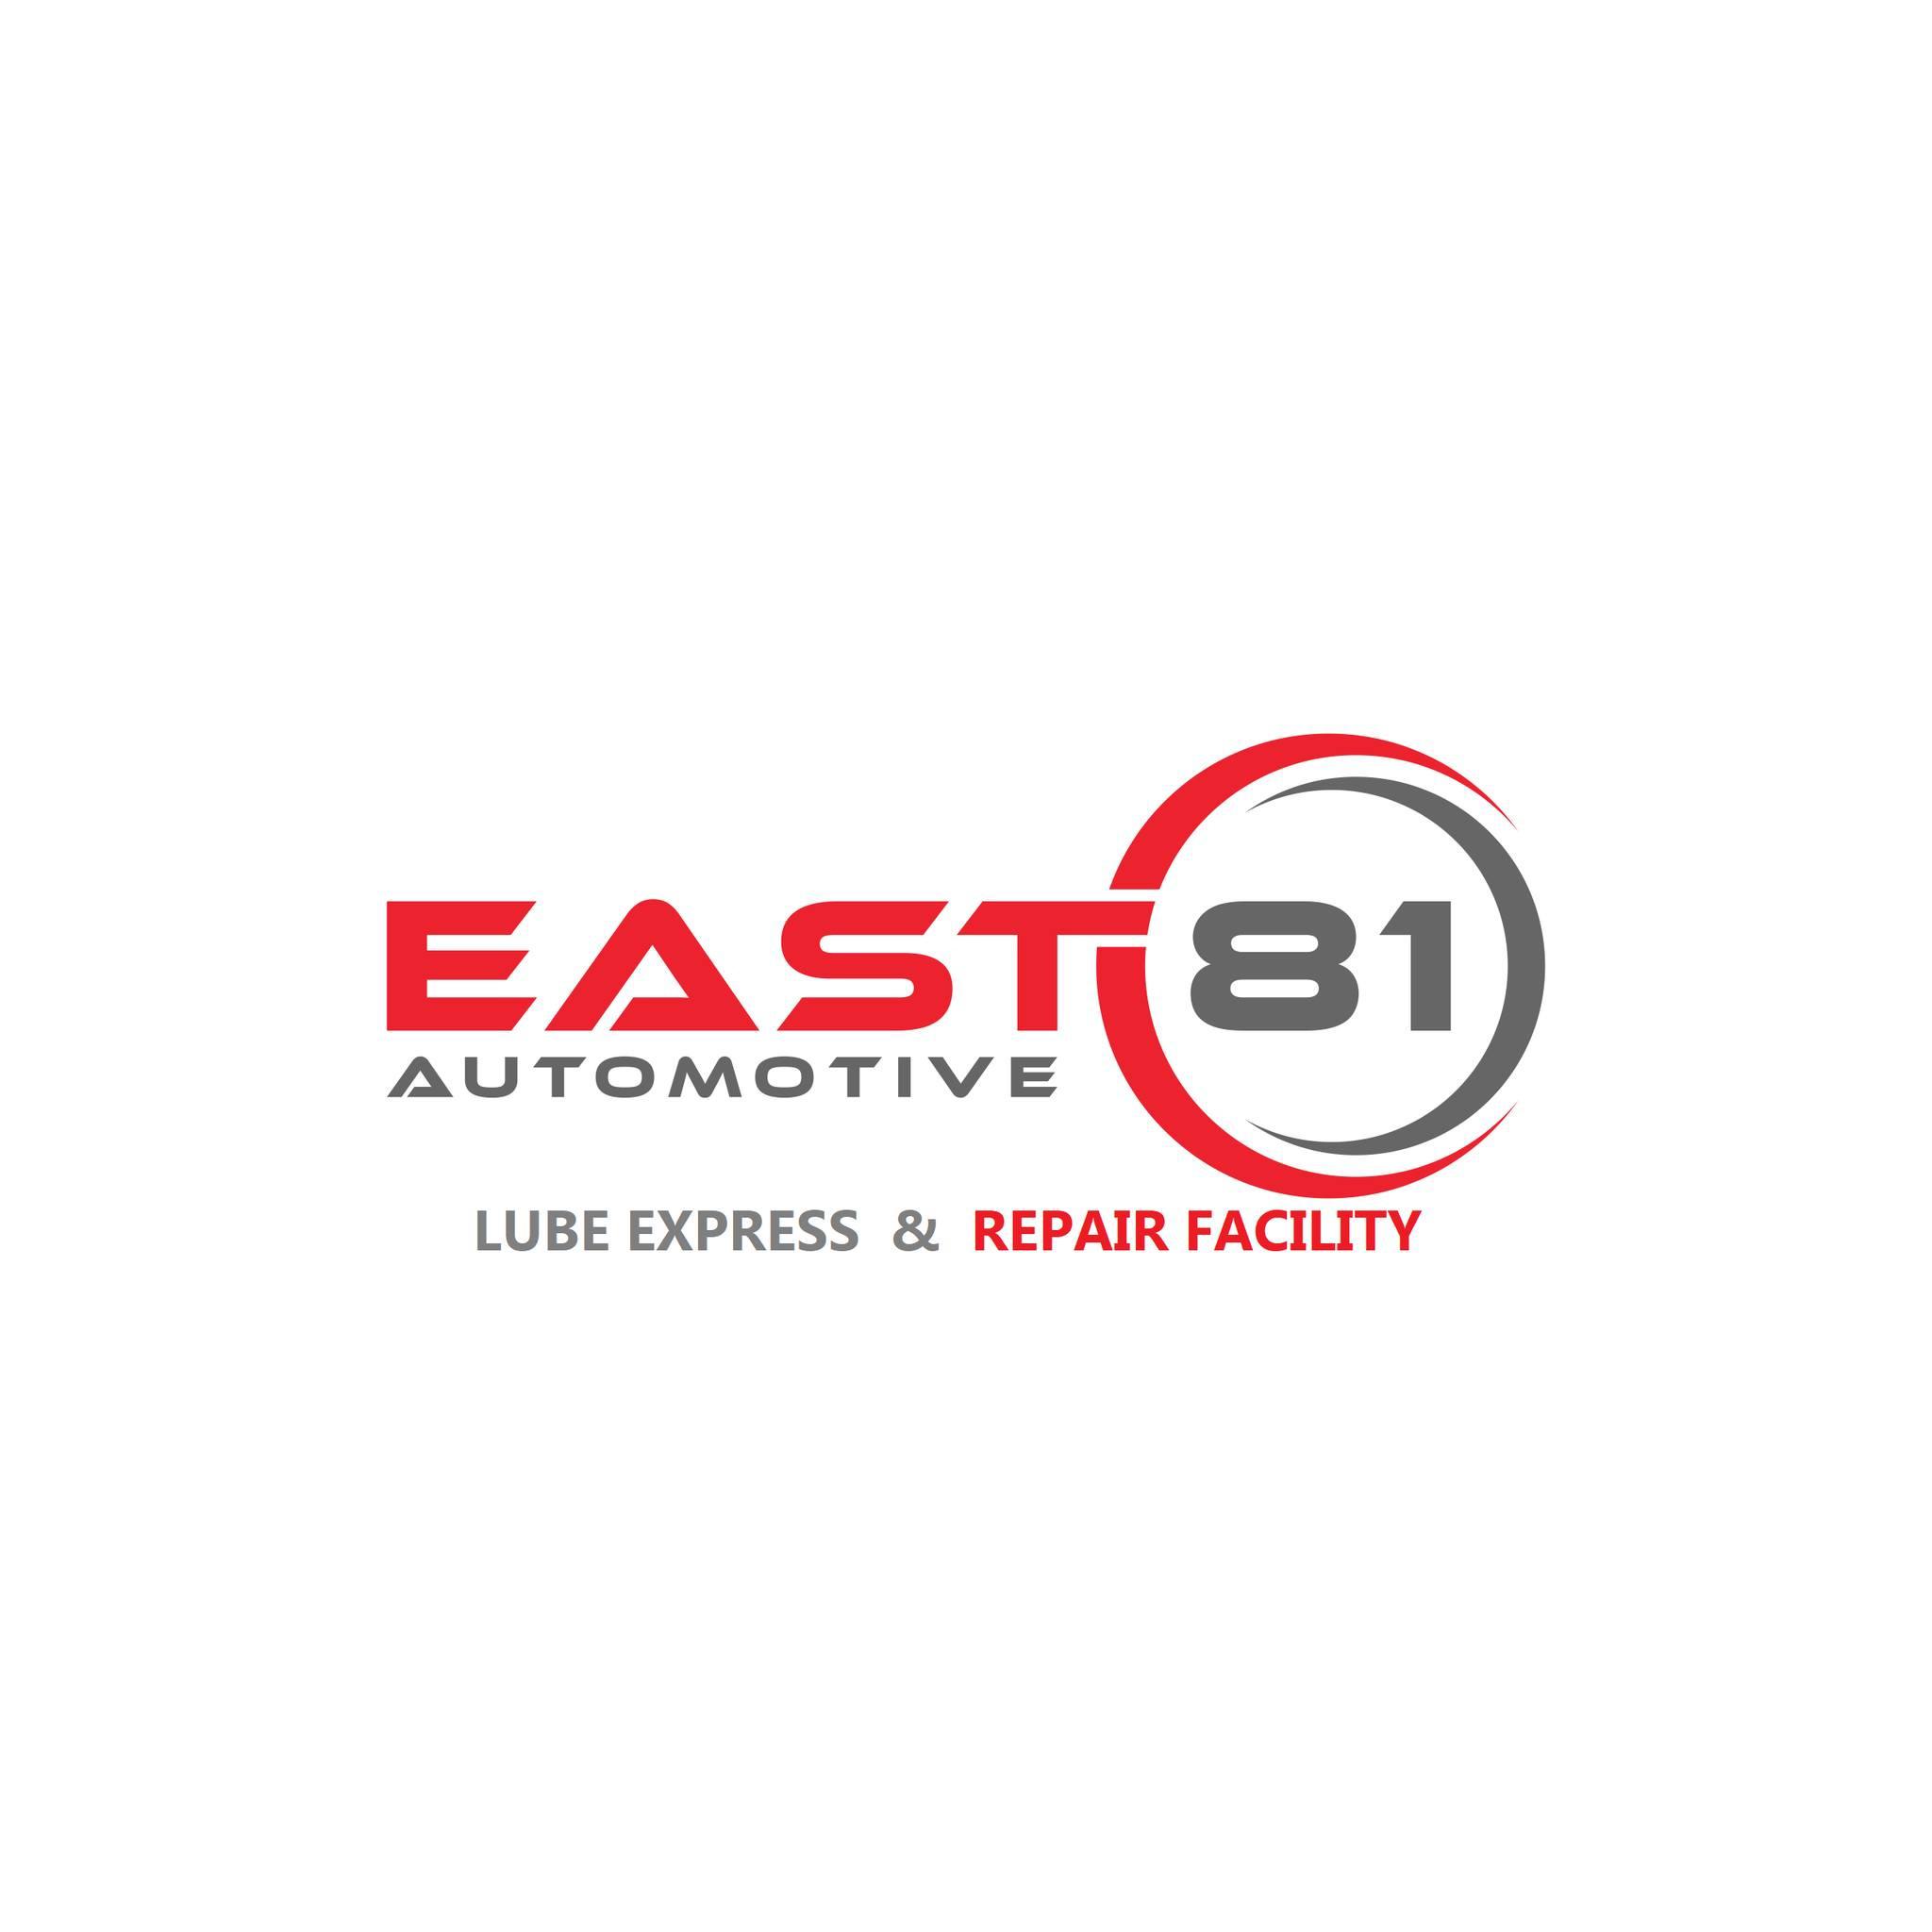 East 81 Automotive ( Lube Express & Repair Facility) Logo